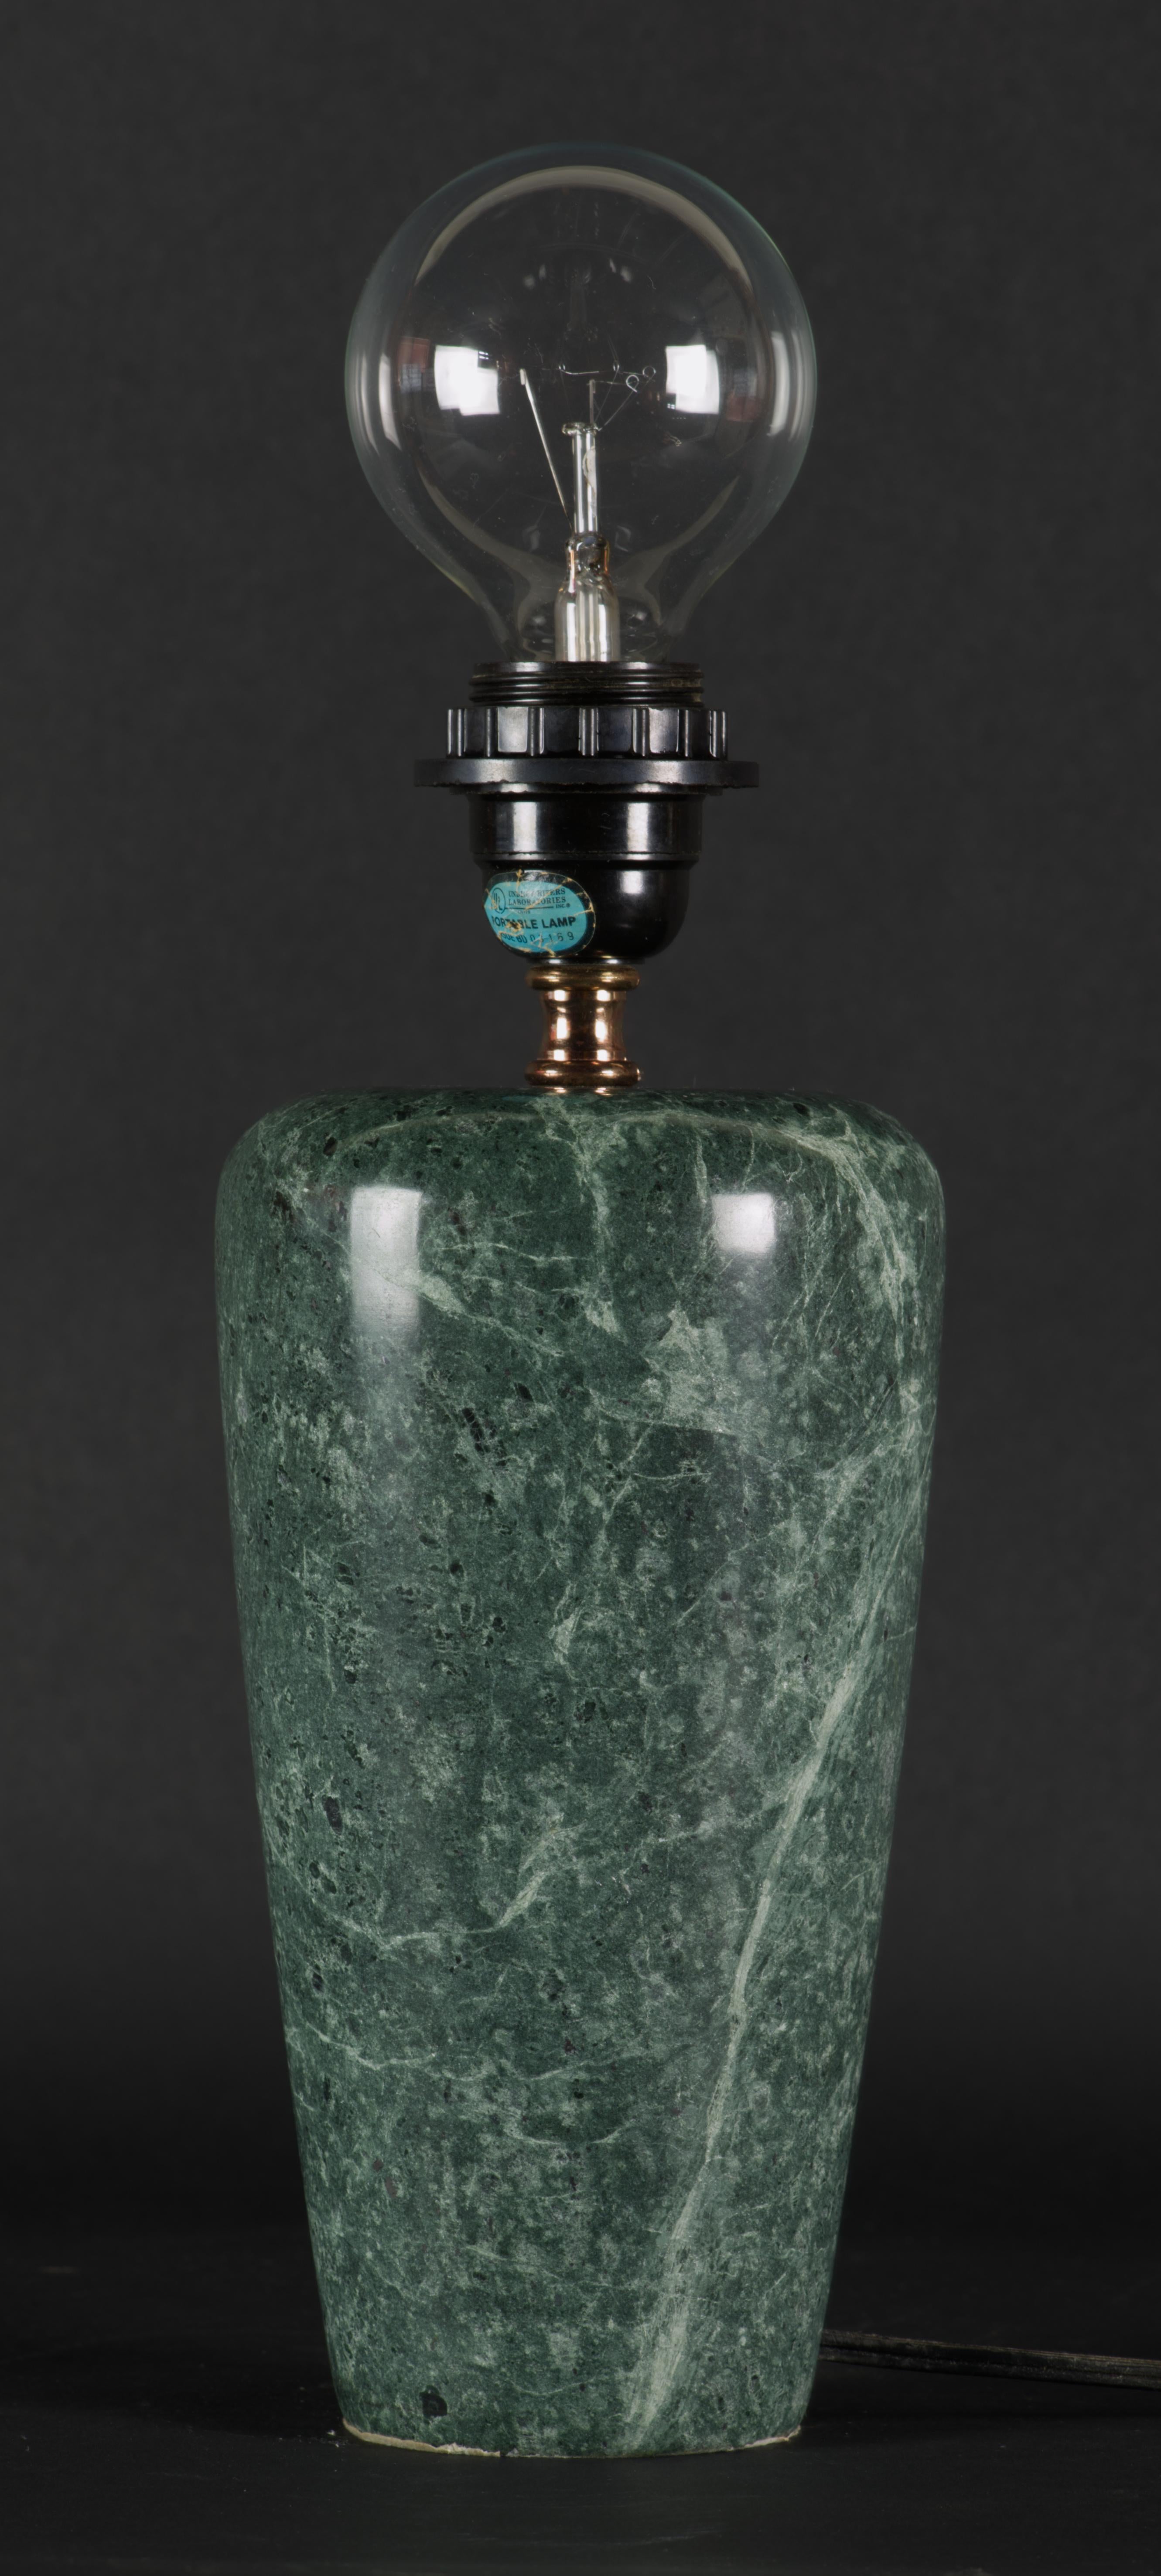 
The lamp has distinctive post-modern lines; it's made of deep green marble with light green veining.

The lap is 12